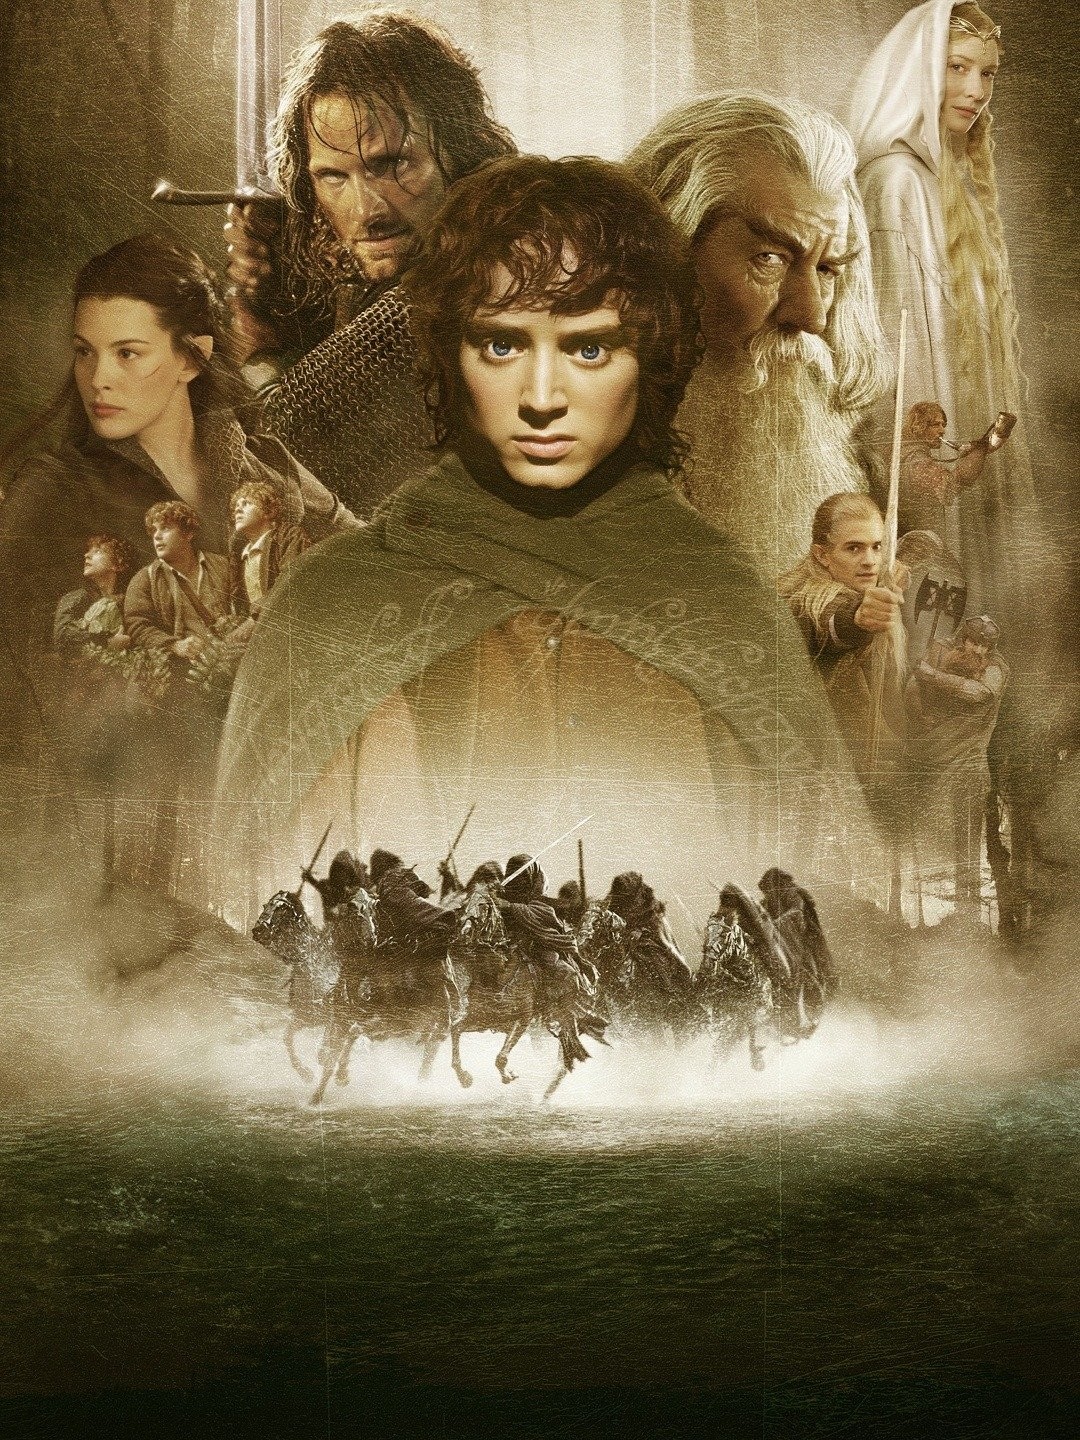 The Lord of the Rings: The Fellowship of the Ring: 4K Remaster Trailer 1 -  Trailers & Videos - Rotten Tomatoes